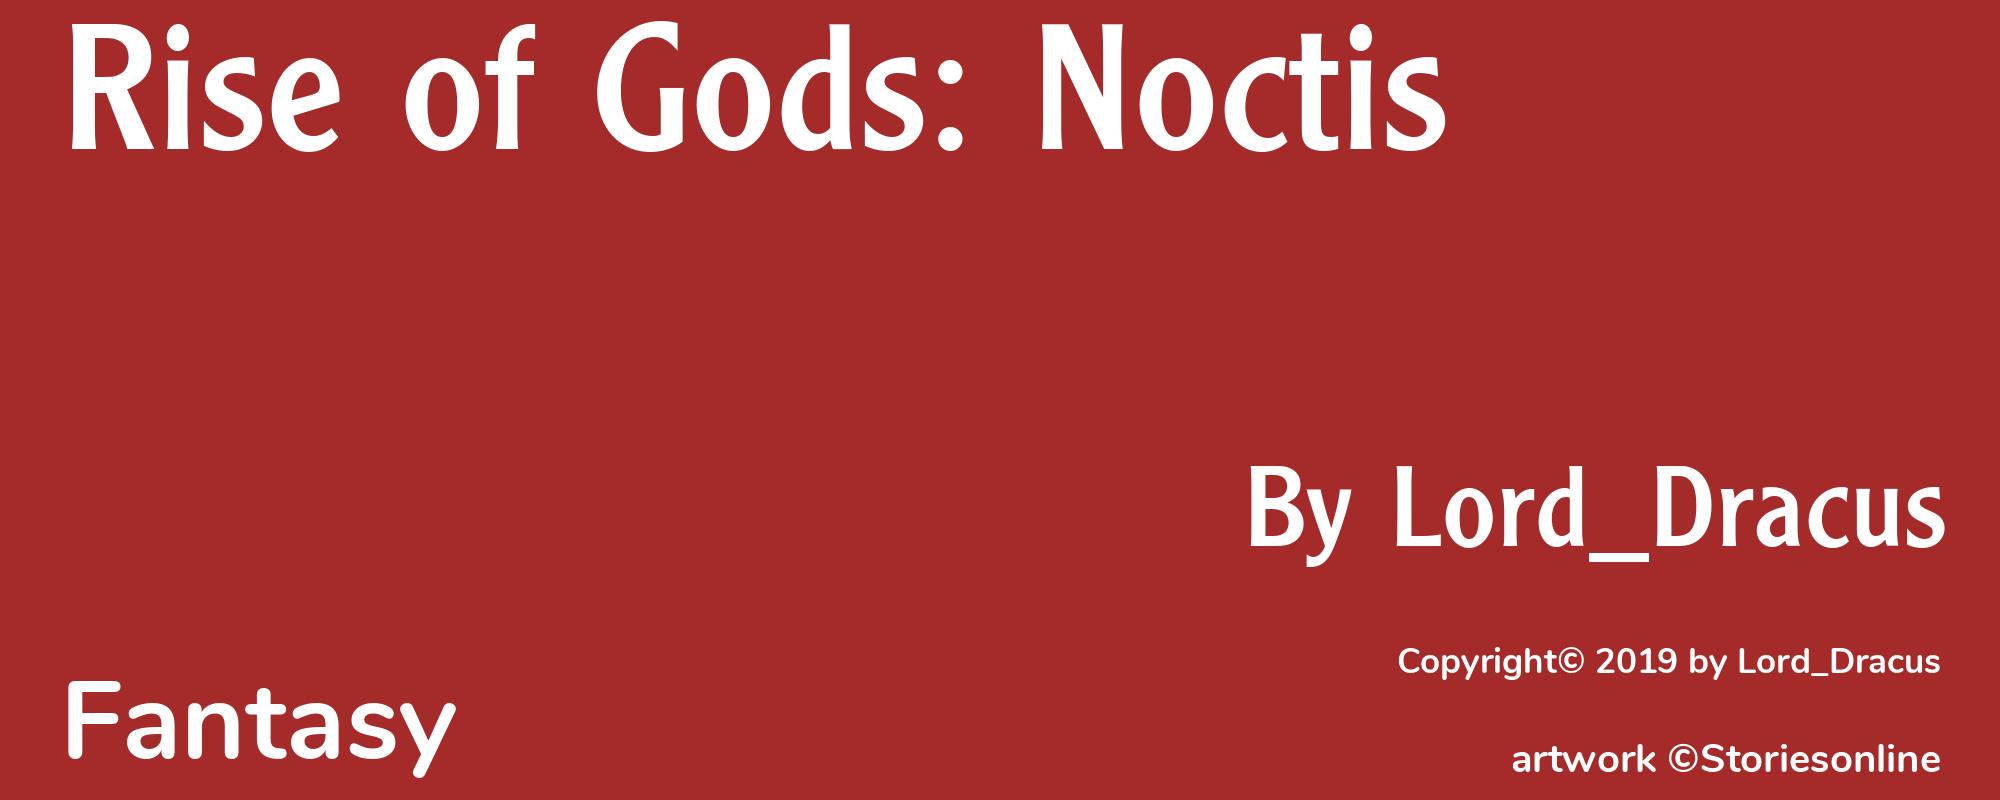 Rise of Gods: Noctis - Cover